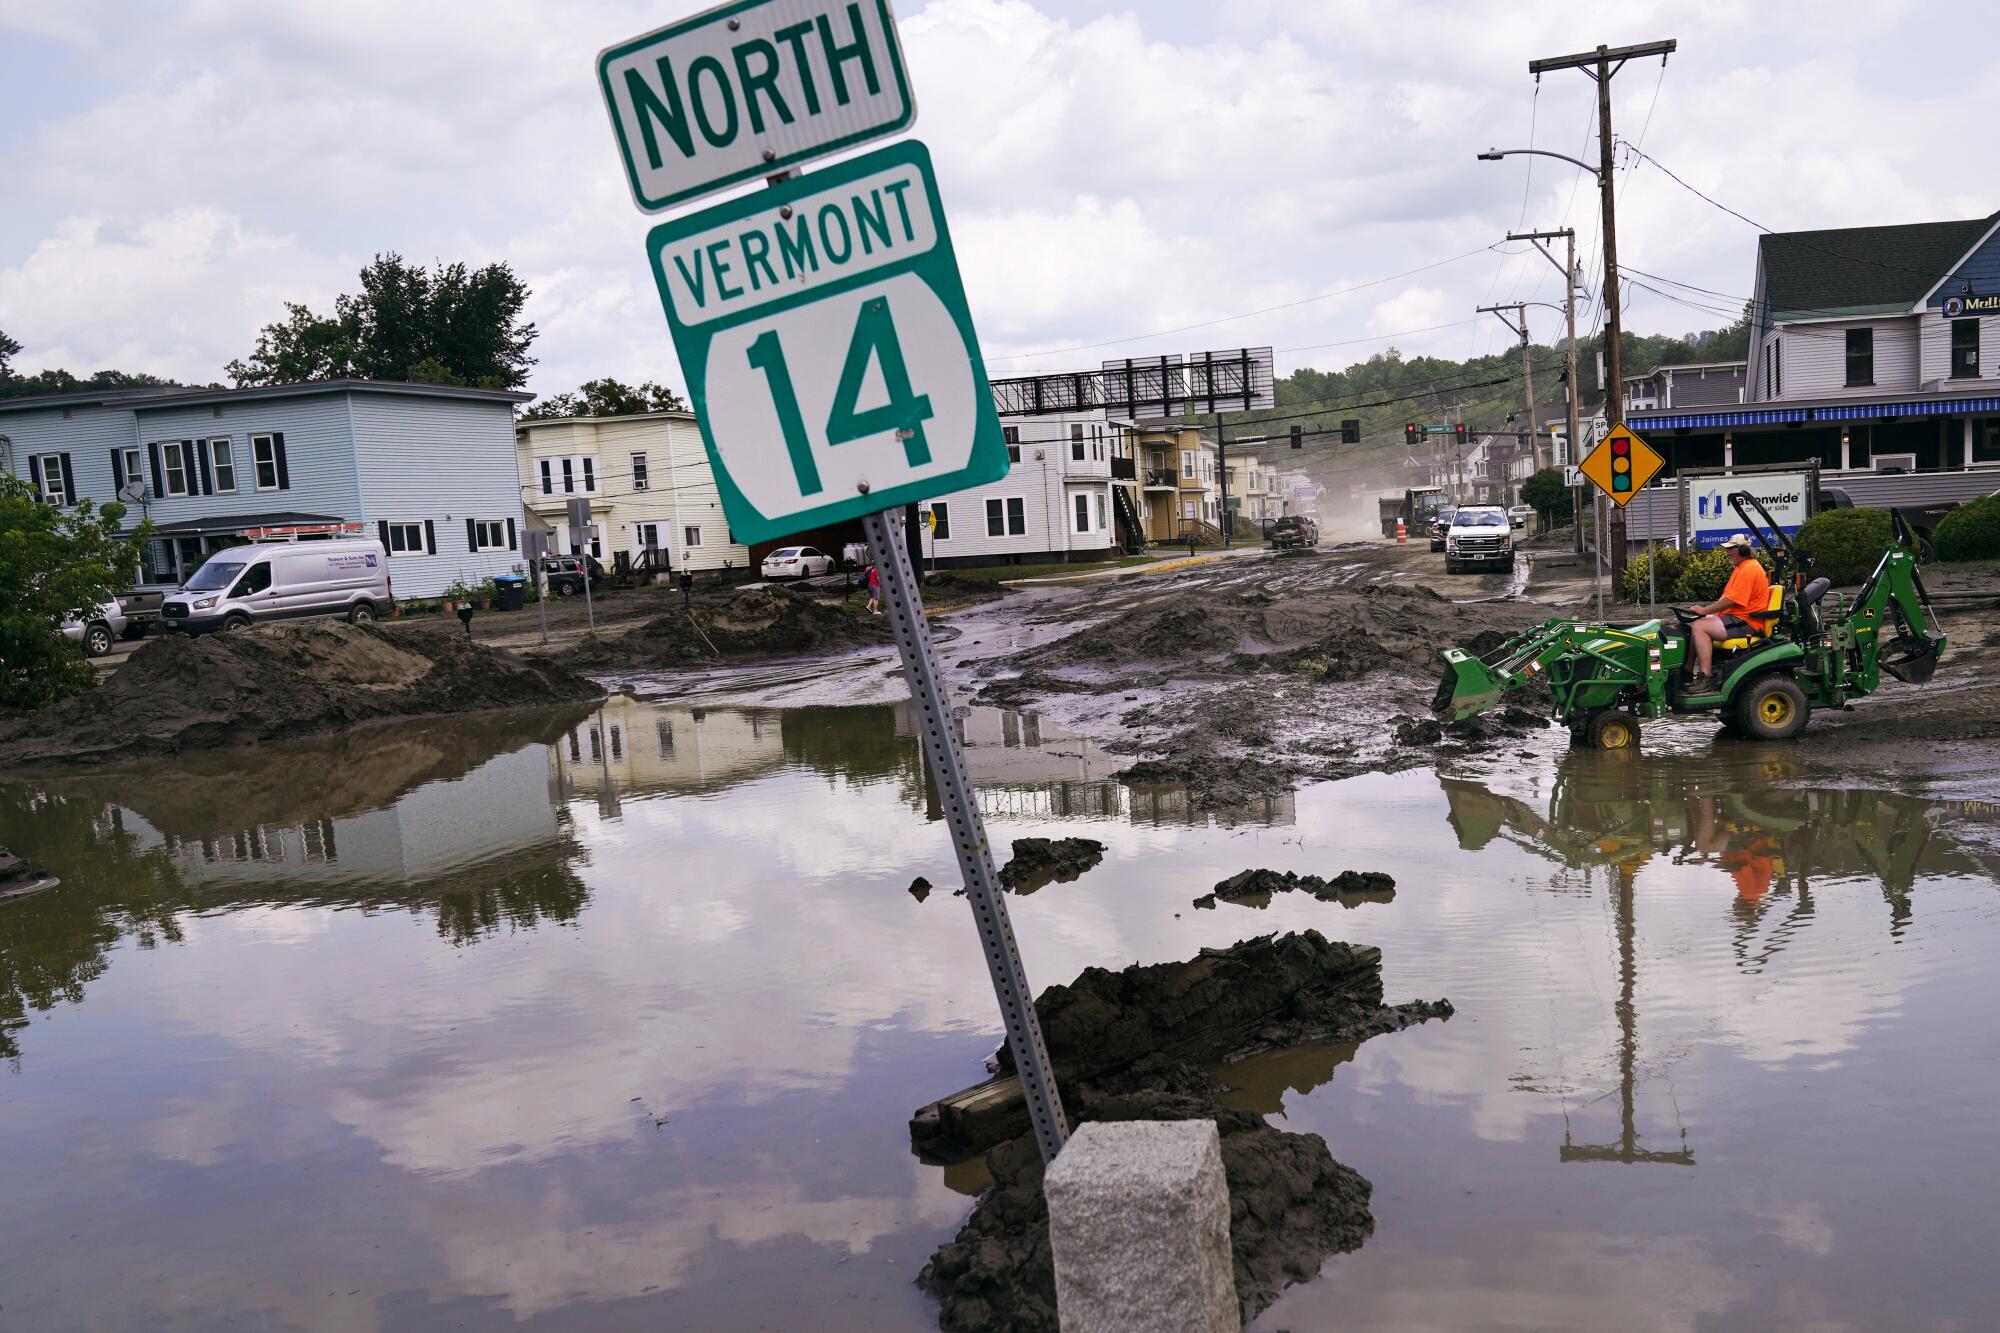 A small tractor travels through mud next to floodwaters that partially submerge a sign reading "North Vermont 14."